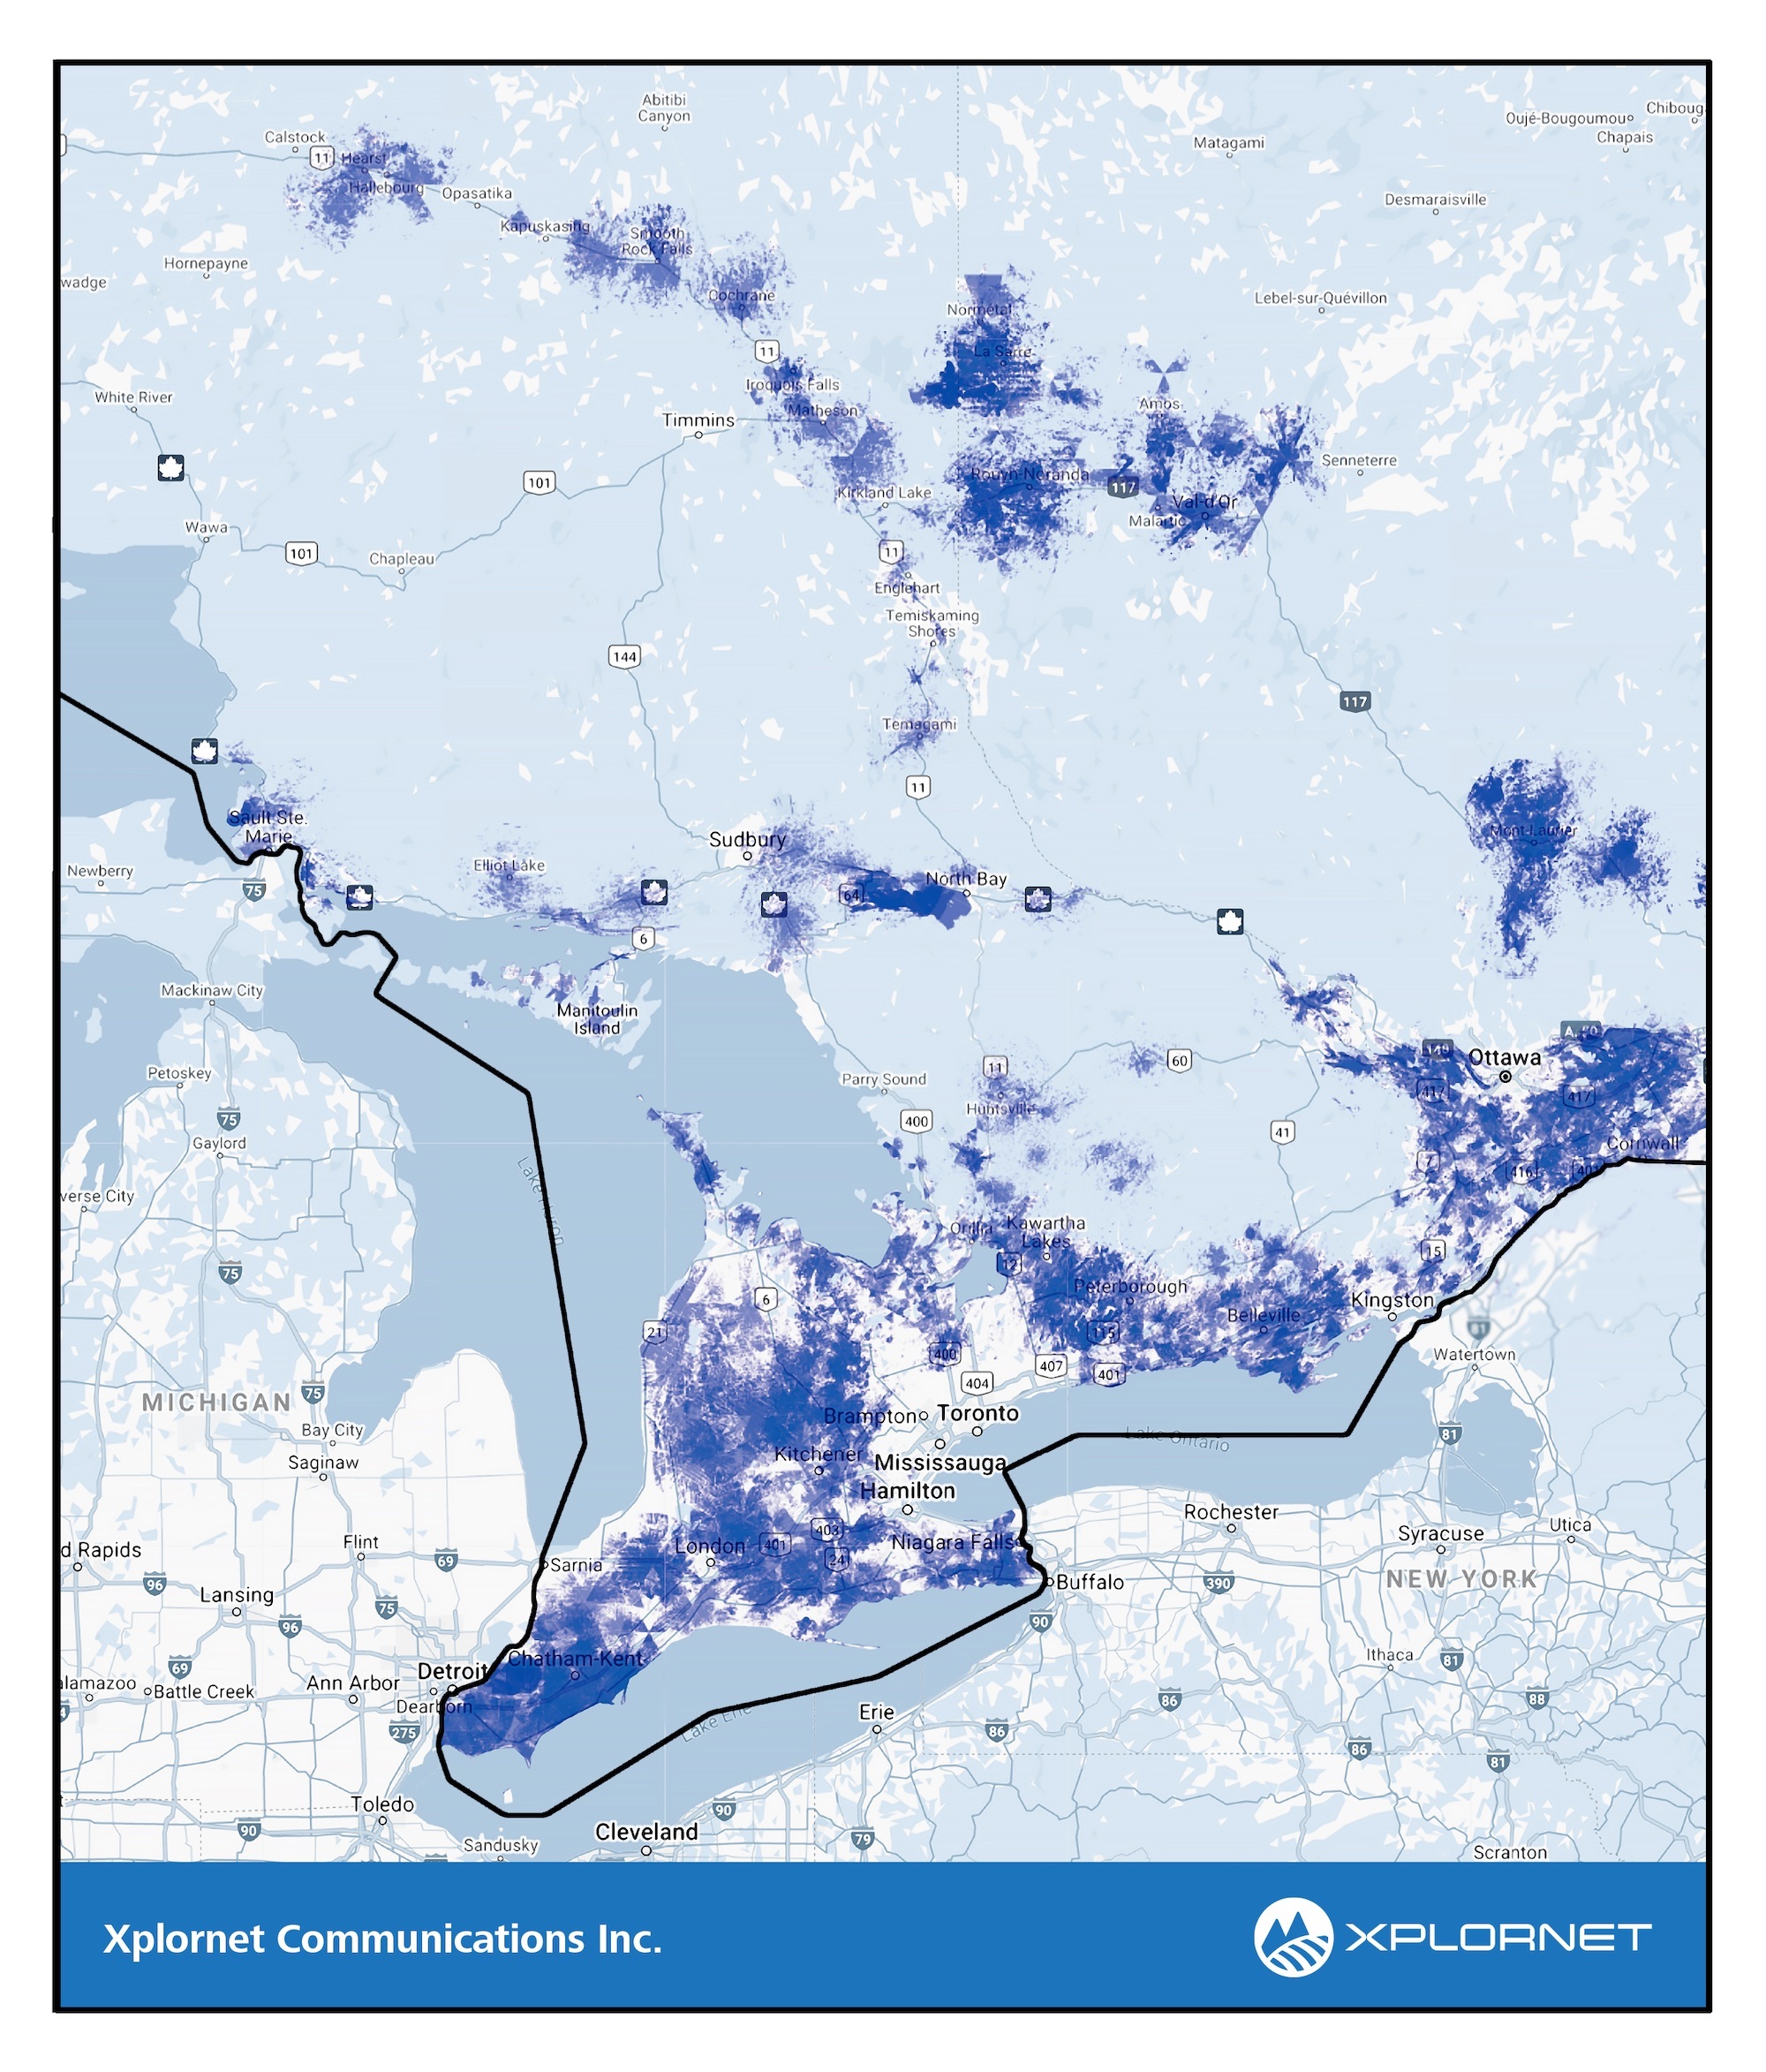 Going Faster: Xplore To Provide 50/10 Mbps Speeds to 300,000 Homes in Rural Areas Across Ontario